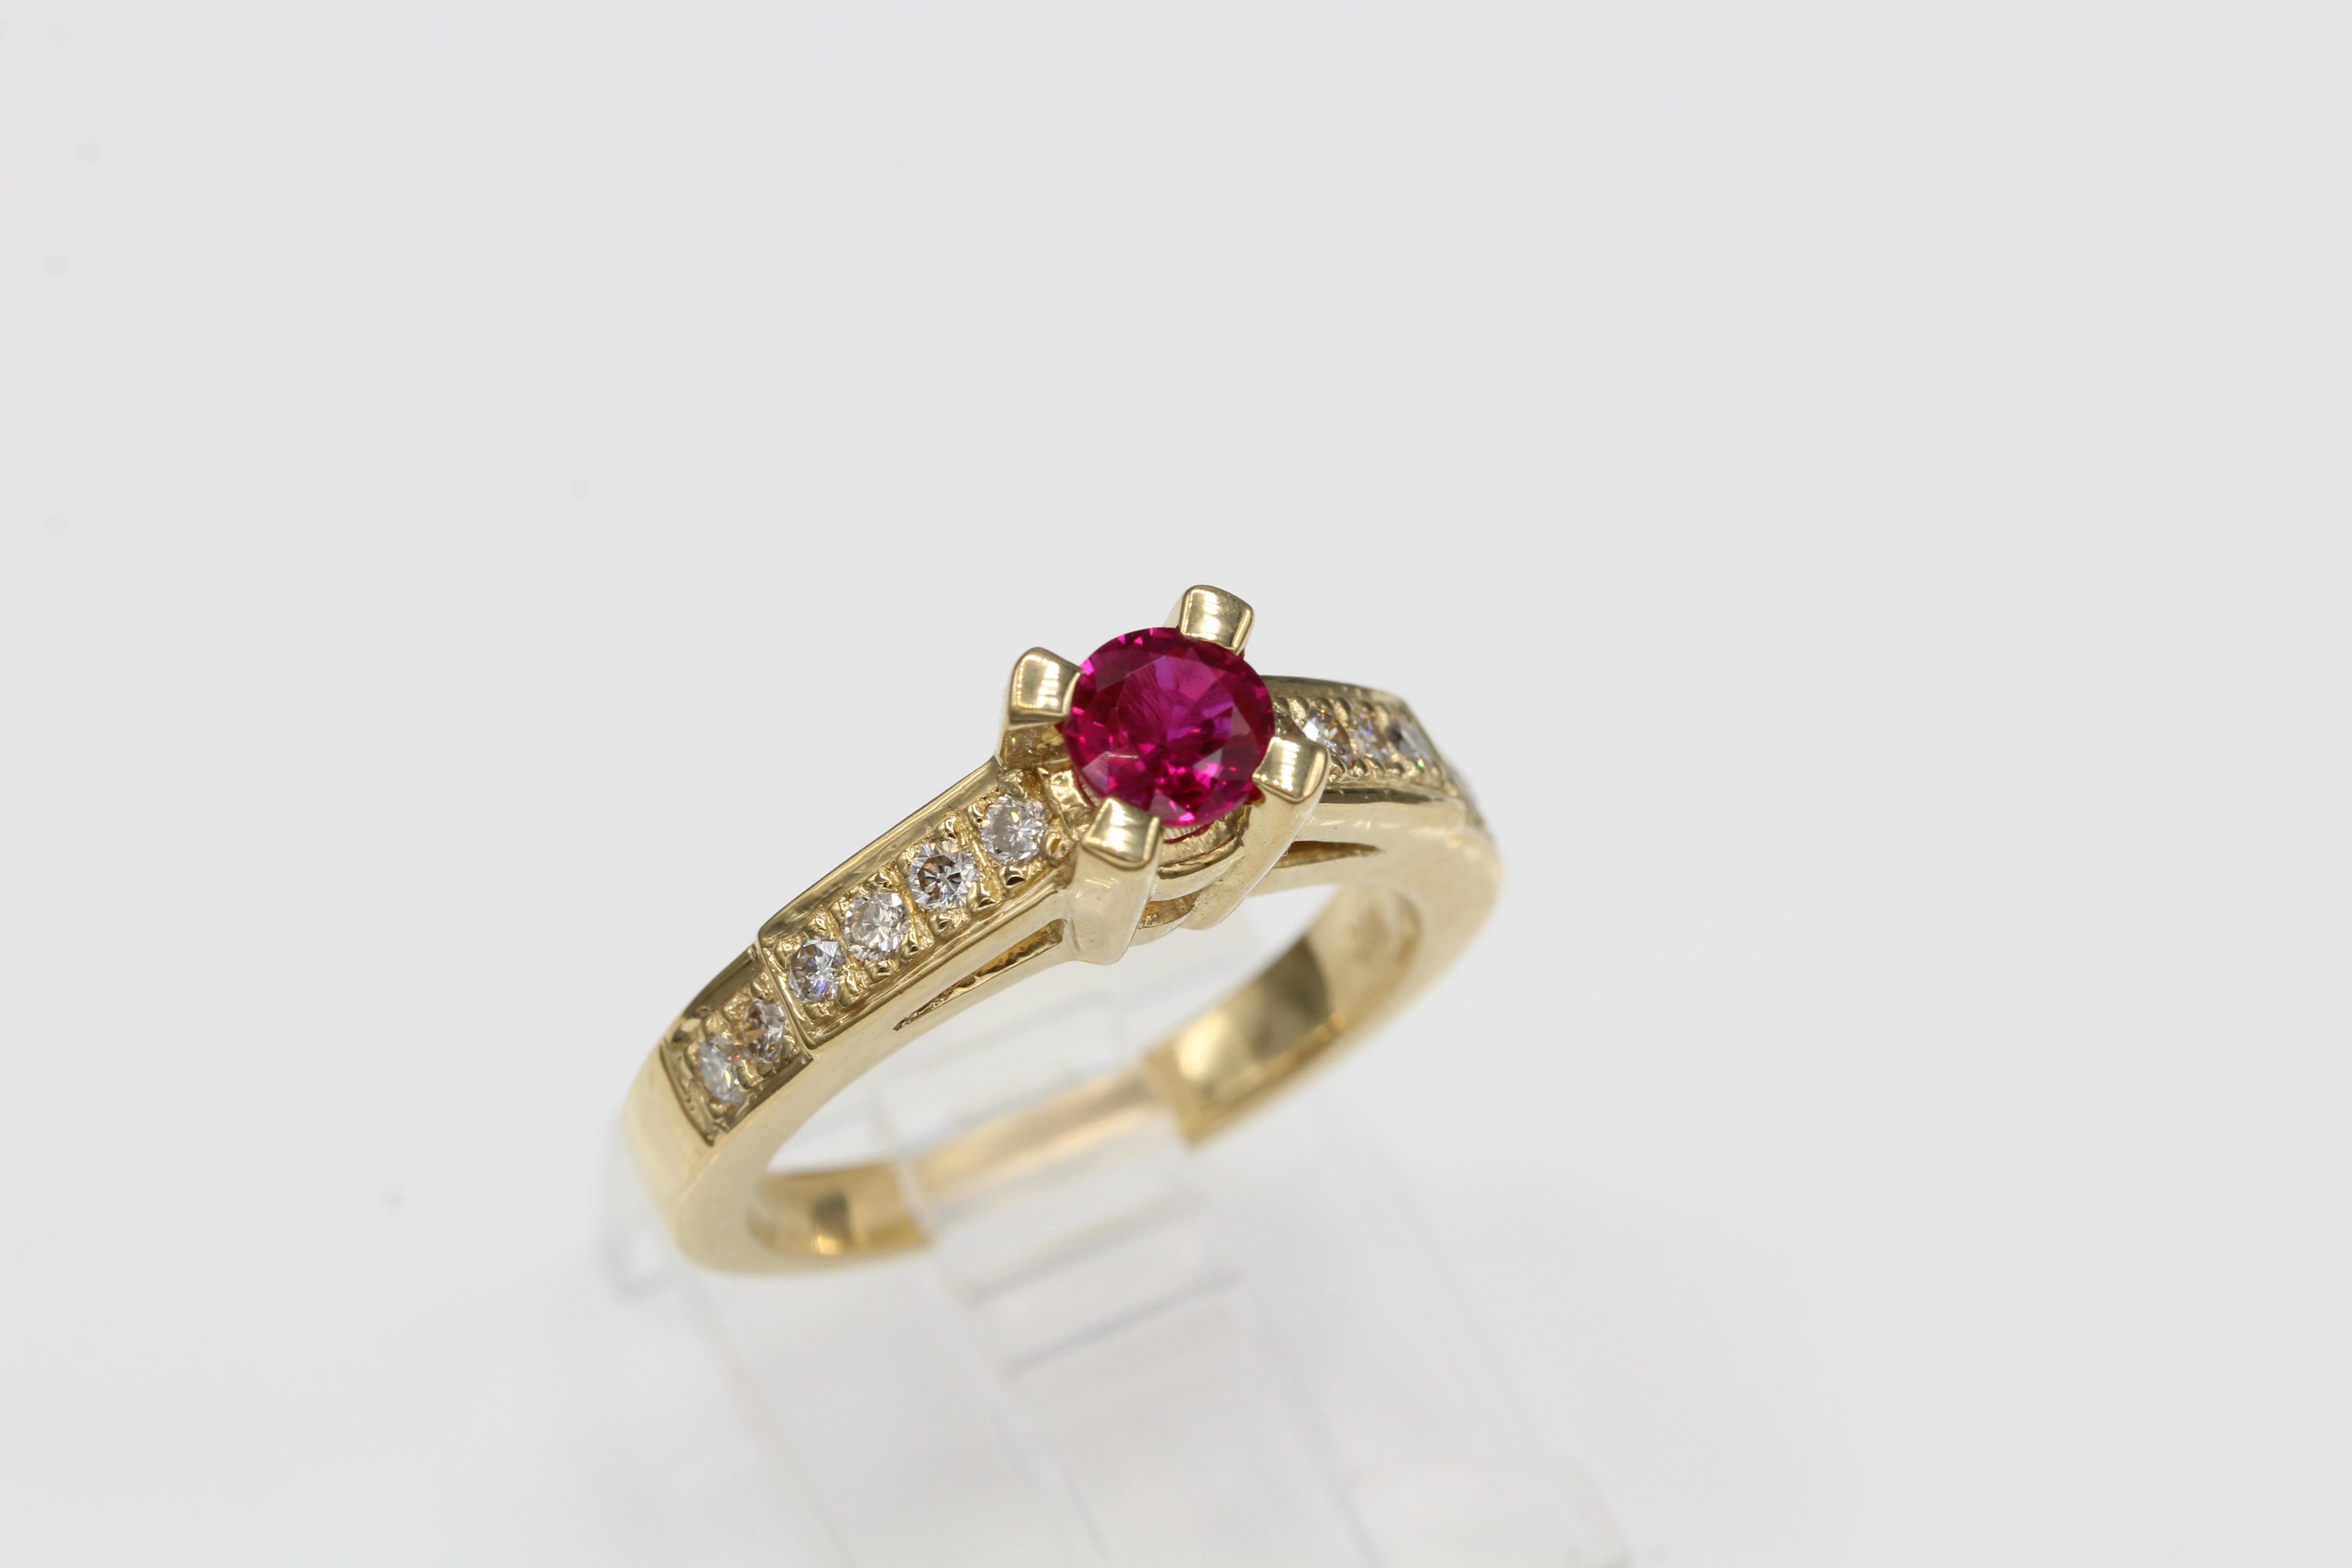  Round shape Natural Ruby very good red color AAA 0.50 carat, and Natural Diamond 0.25 carat GH-VS
 18K Yellow Gold 6.0 Grams, Finger Size 6
